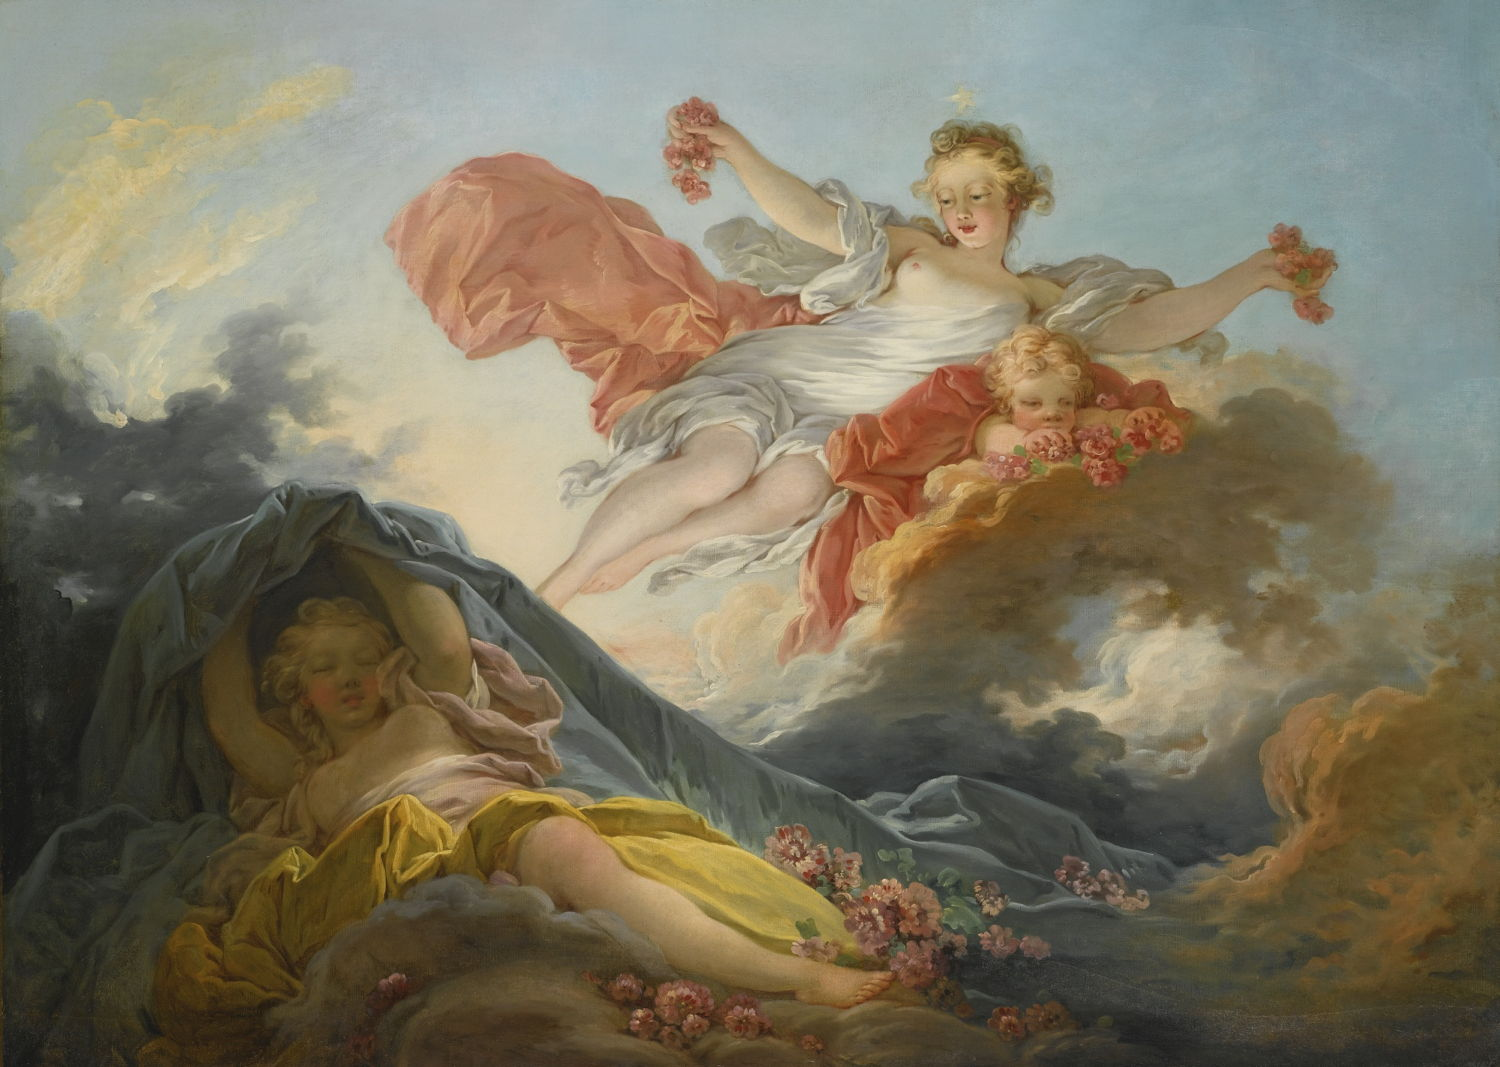 This painting depicts the goddess Eos in a baby blue flowy dress, bringing light to the heavens and earth as she floats above the world with a baby under her arms. 